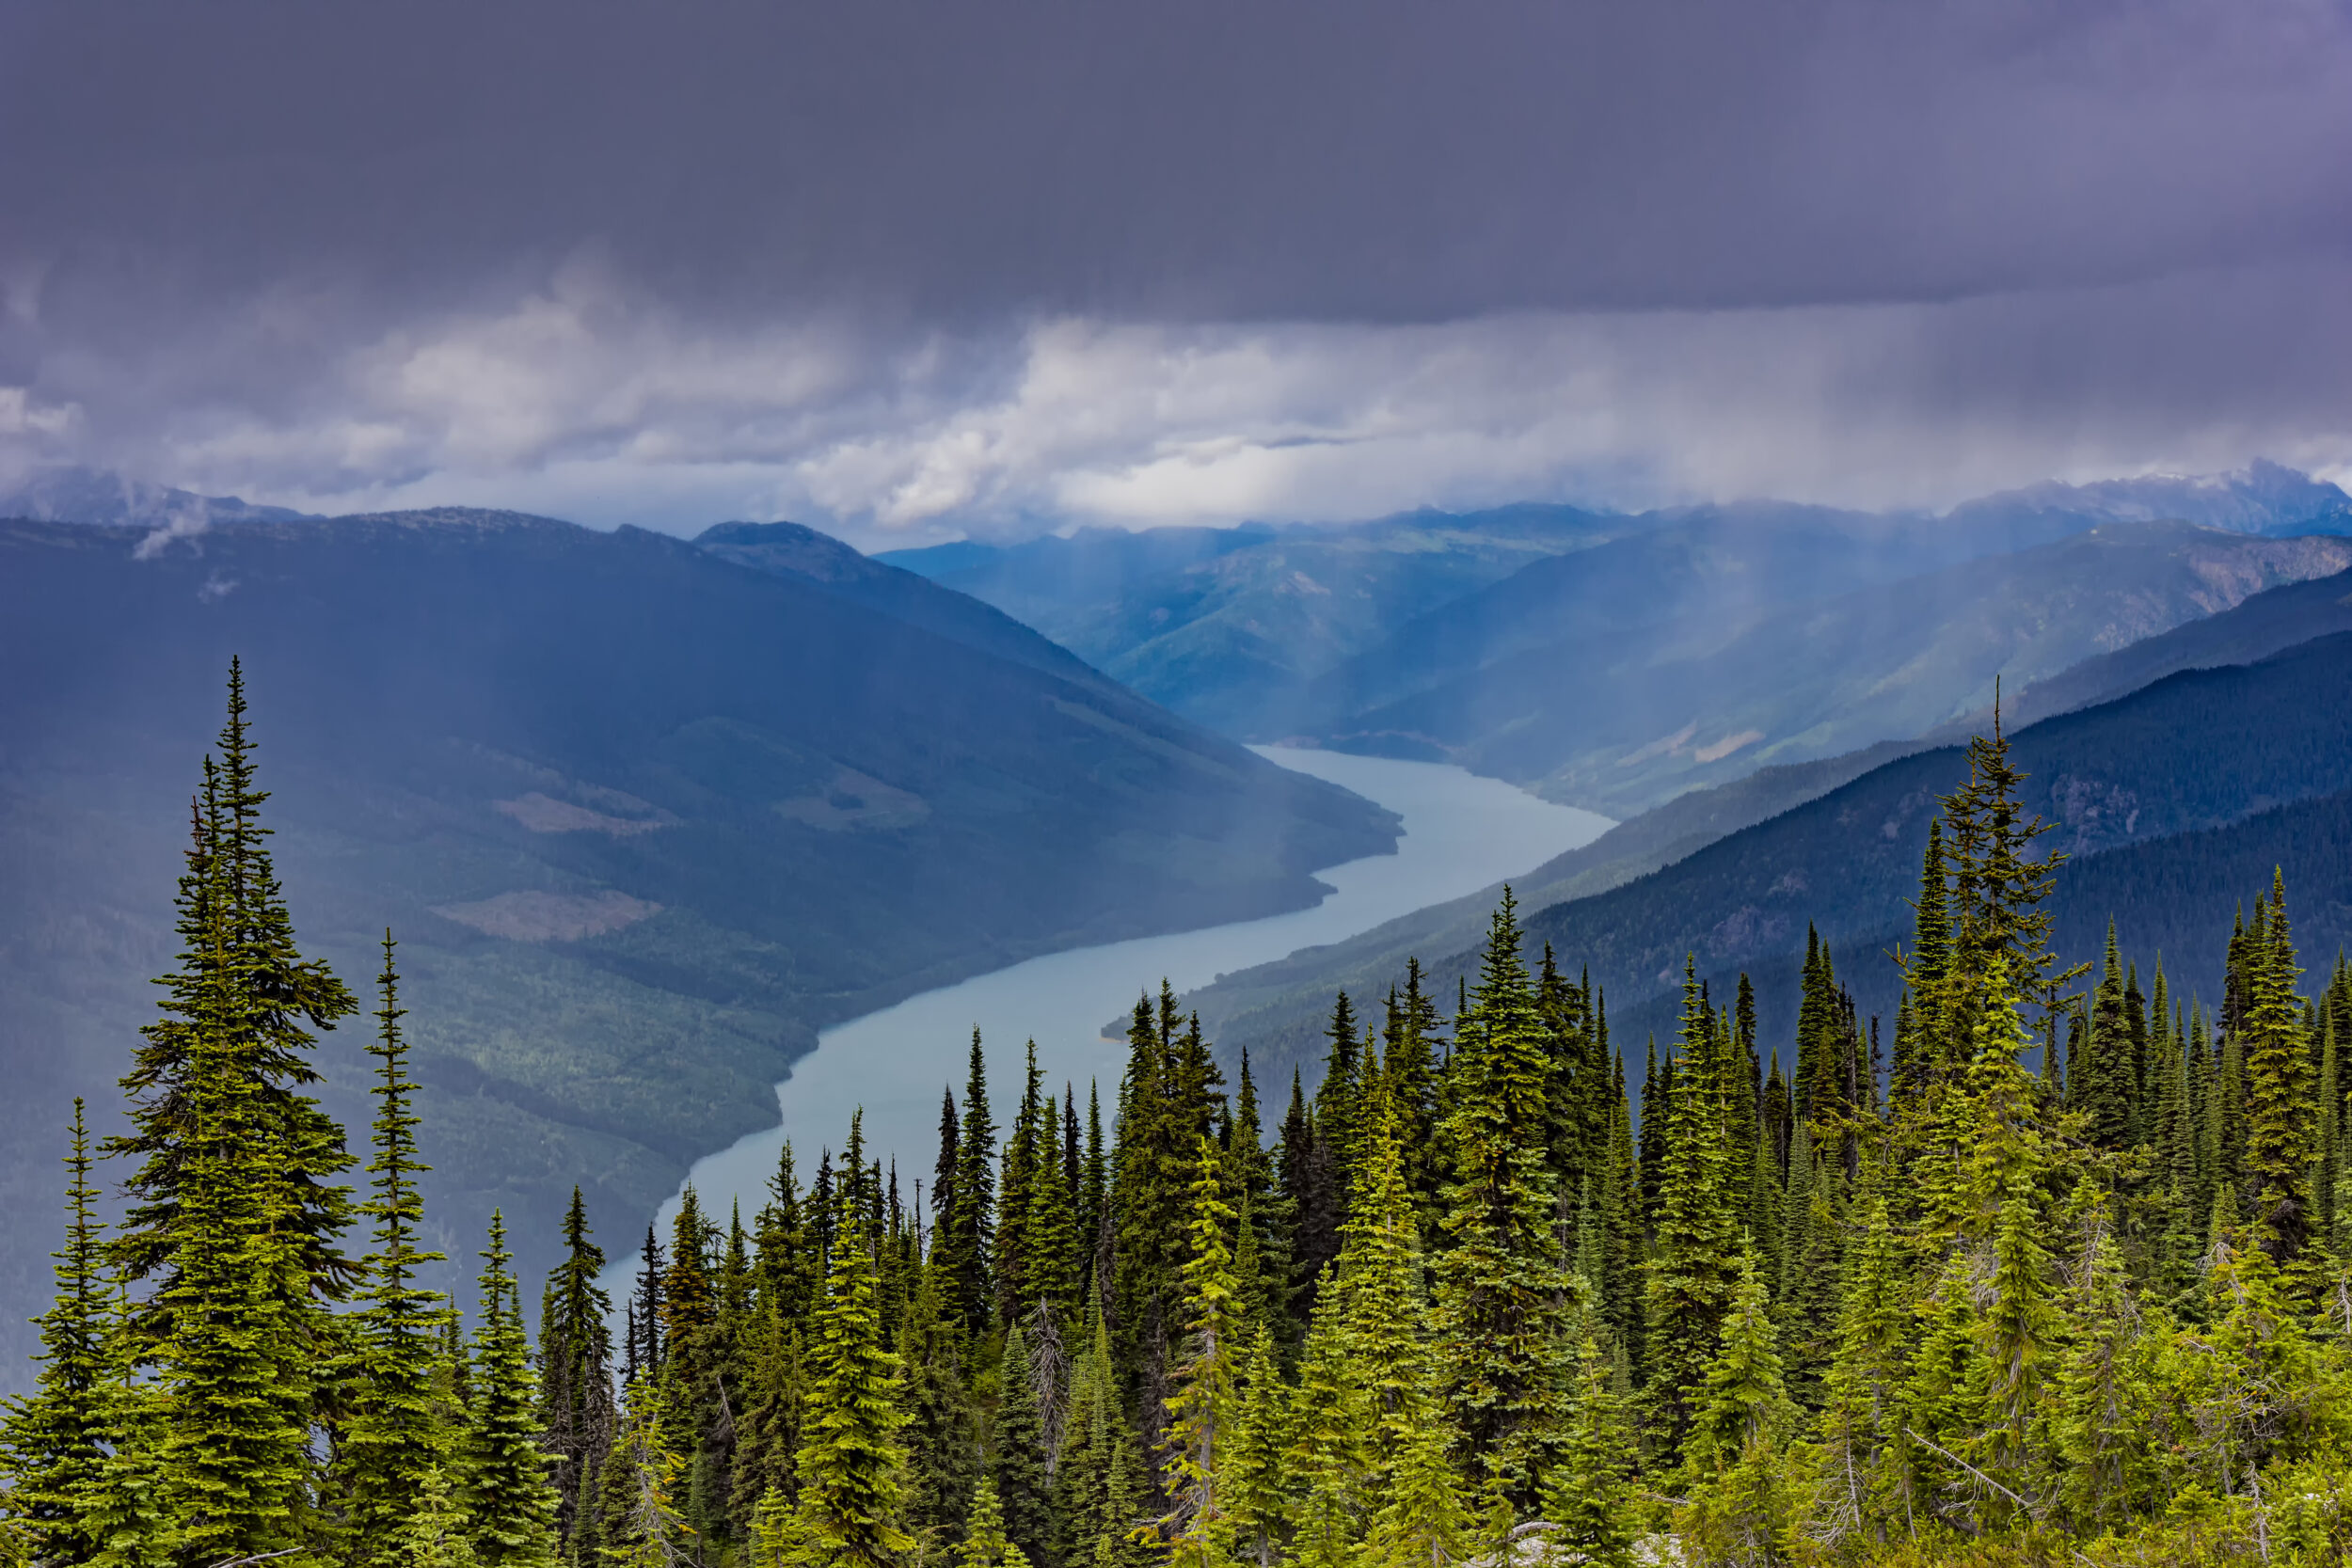 An elevated view of Lake Revelstoke from Mount Revelstoke British Columbia Canada on a stormy day